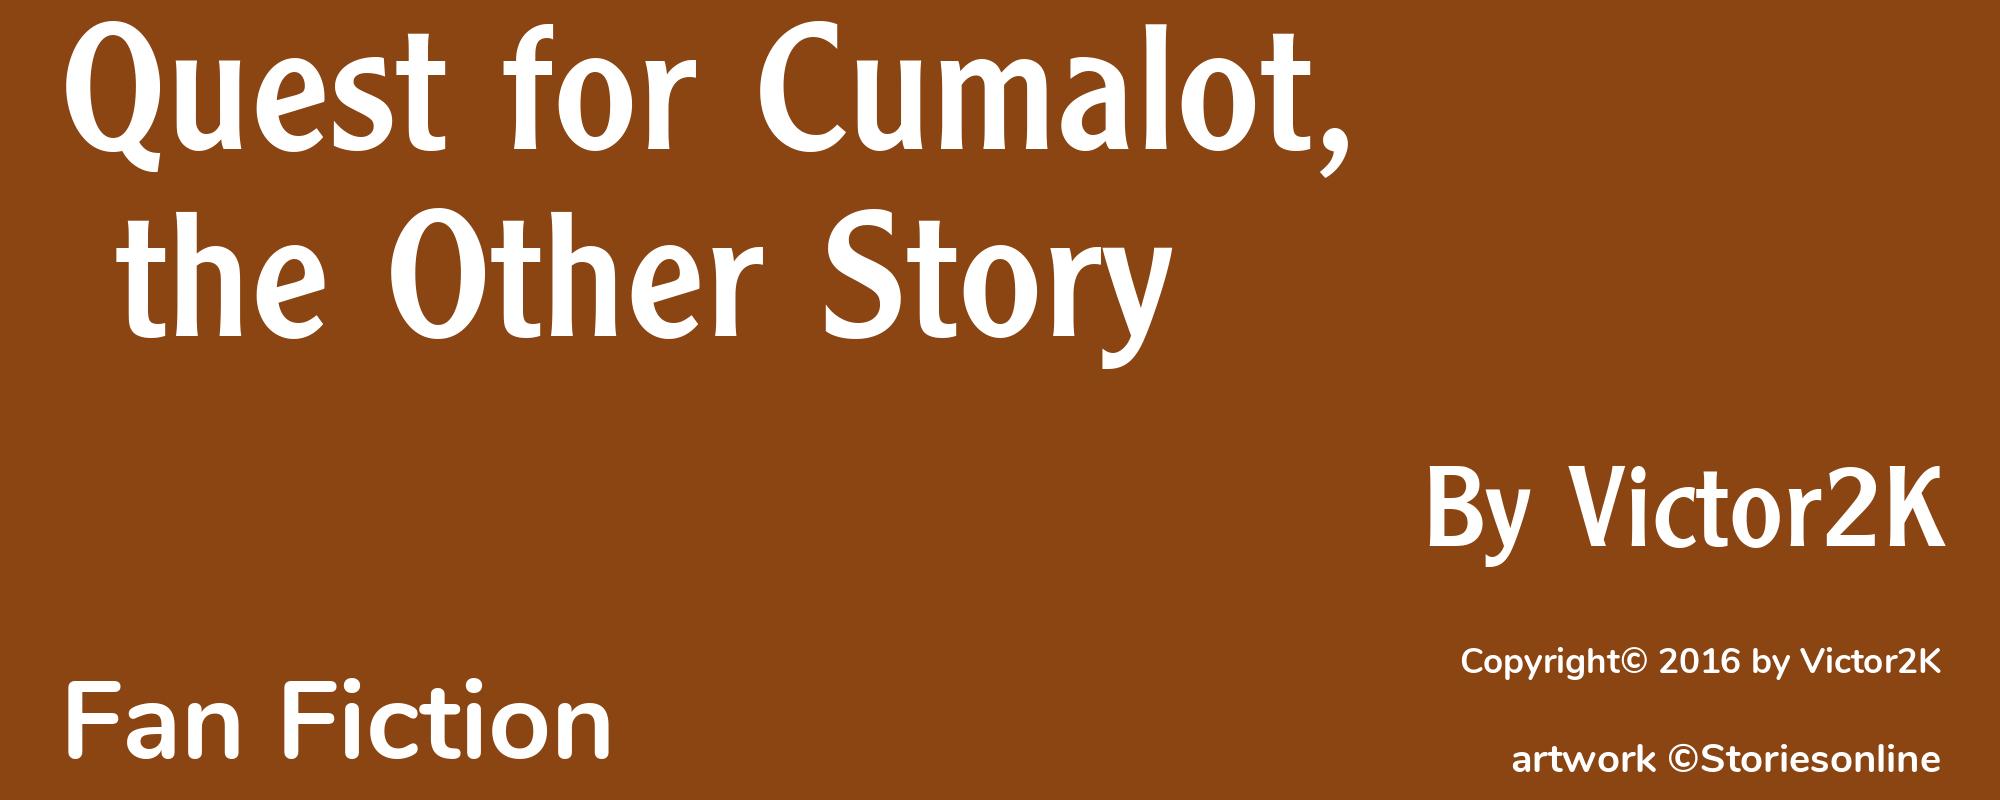 Quest for Cumalot, the Other Story - Cover